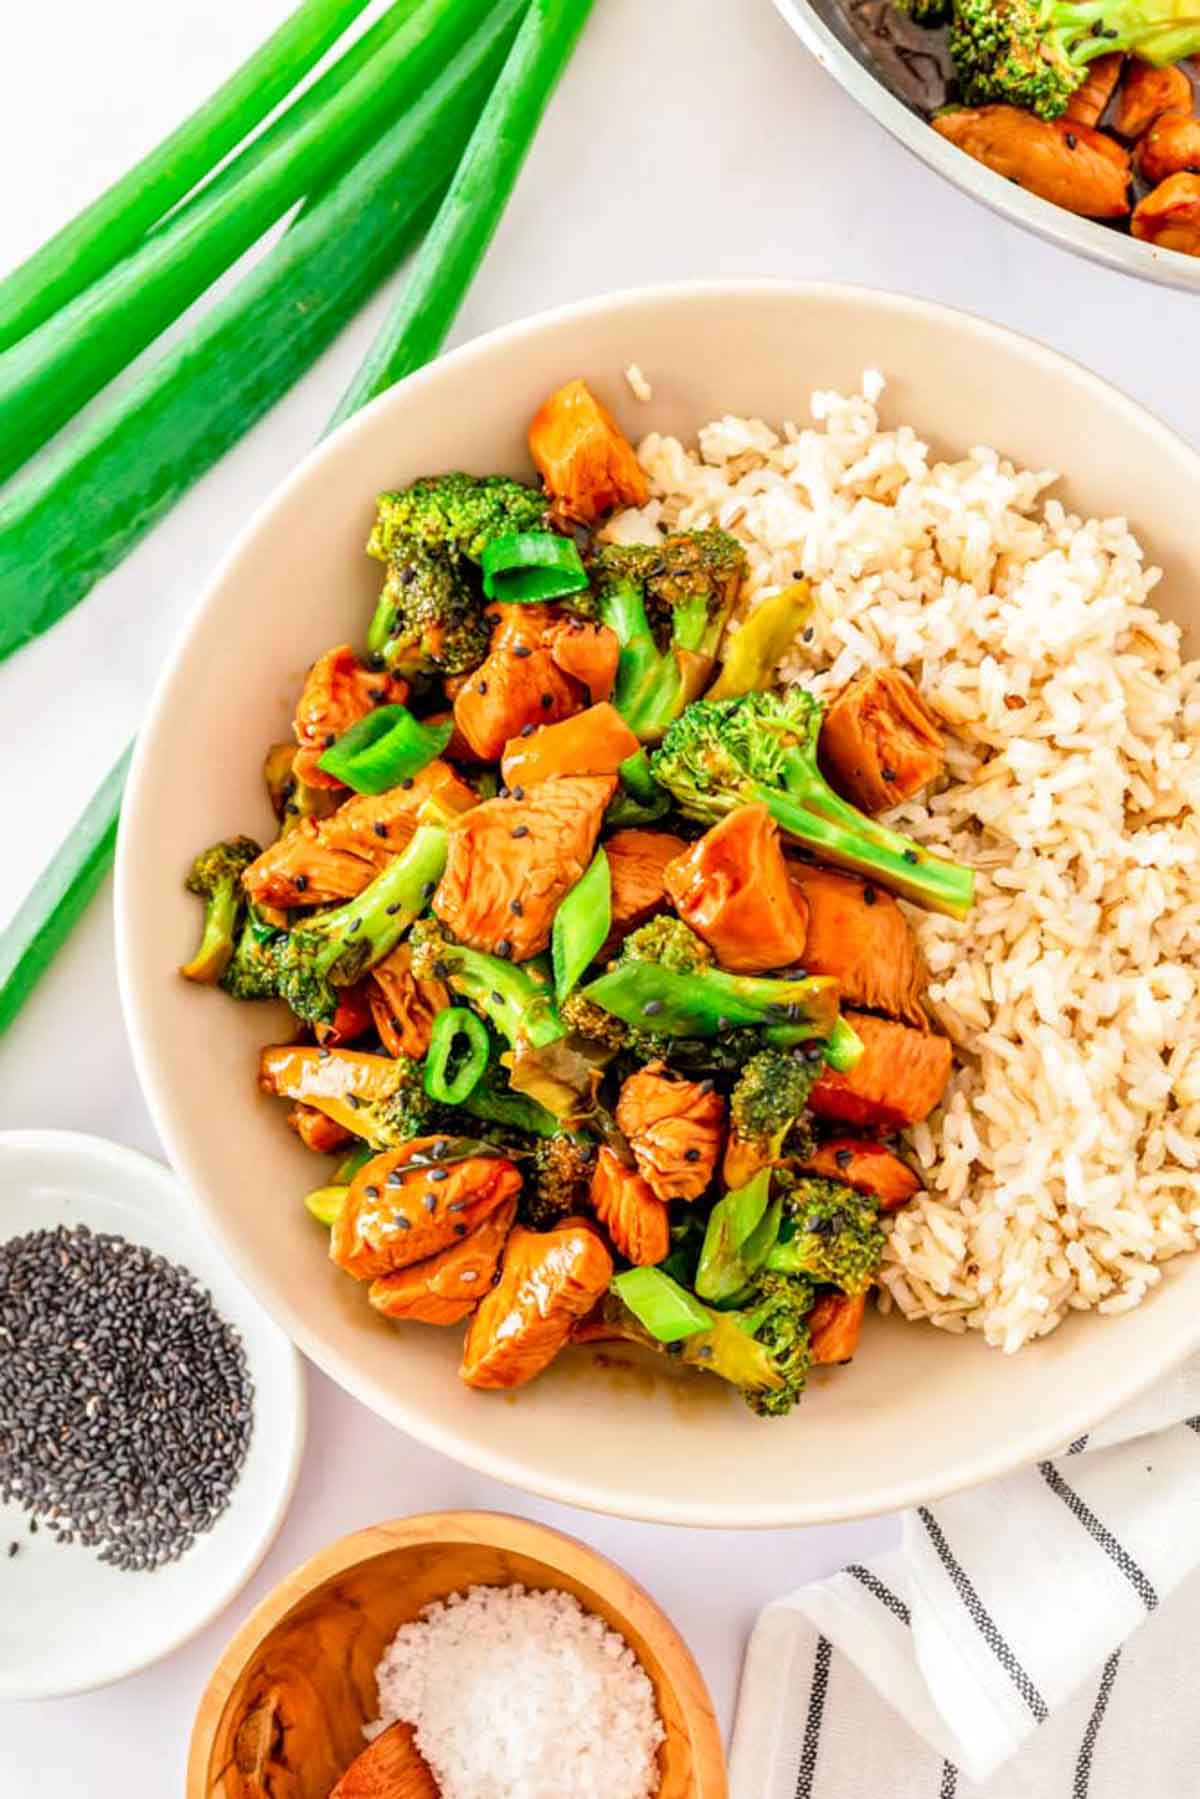 Easy chicken teriyaki with broccoli on a plate with rice.